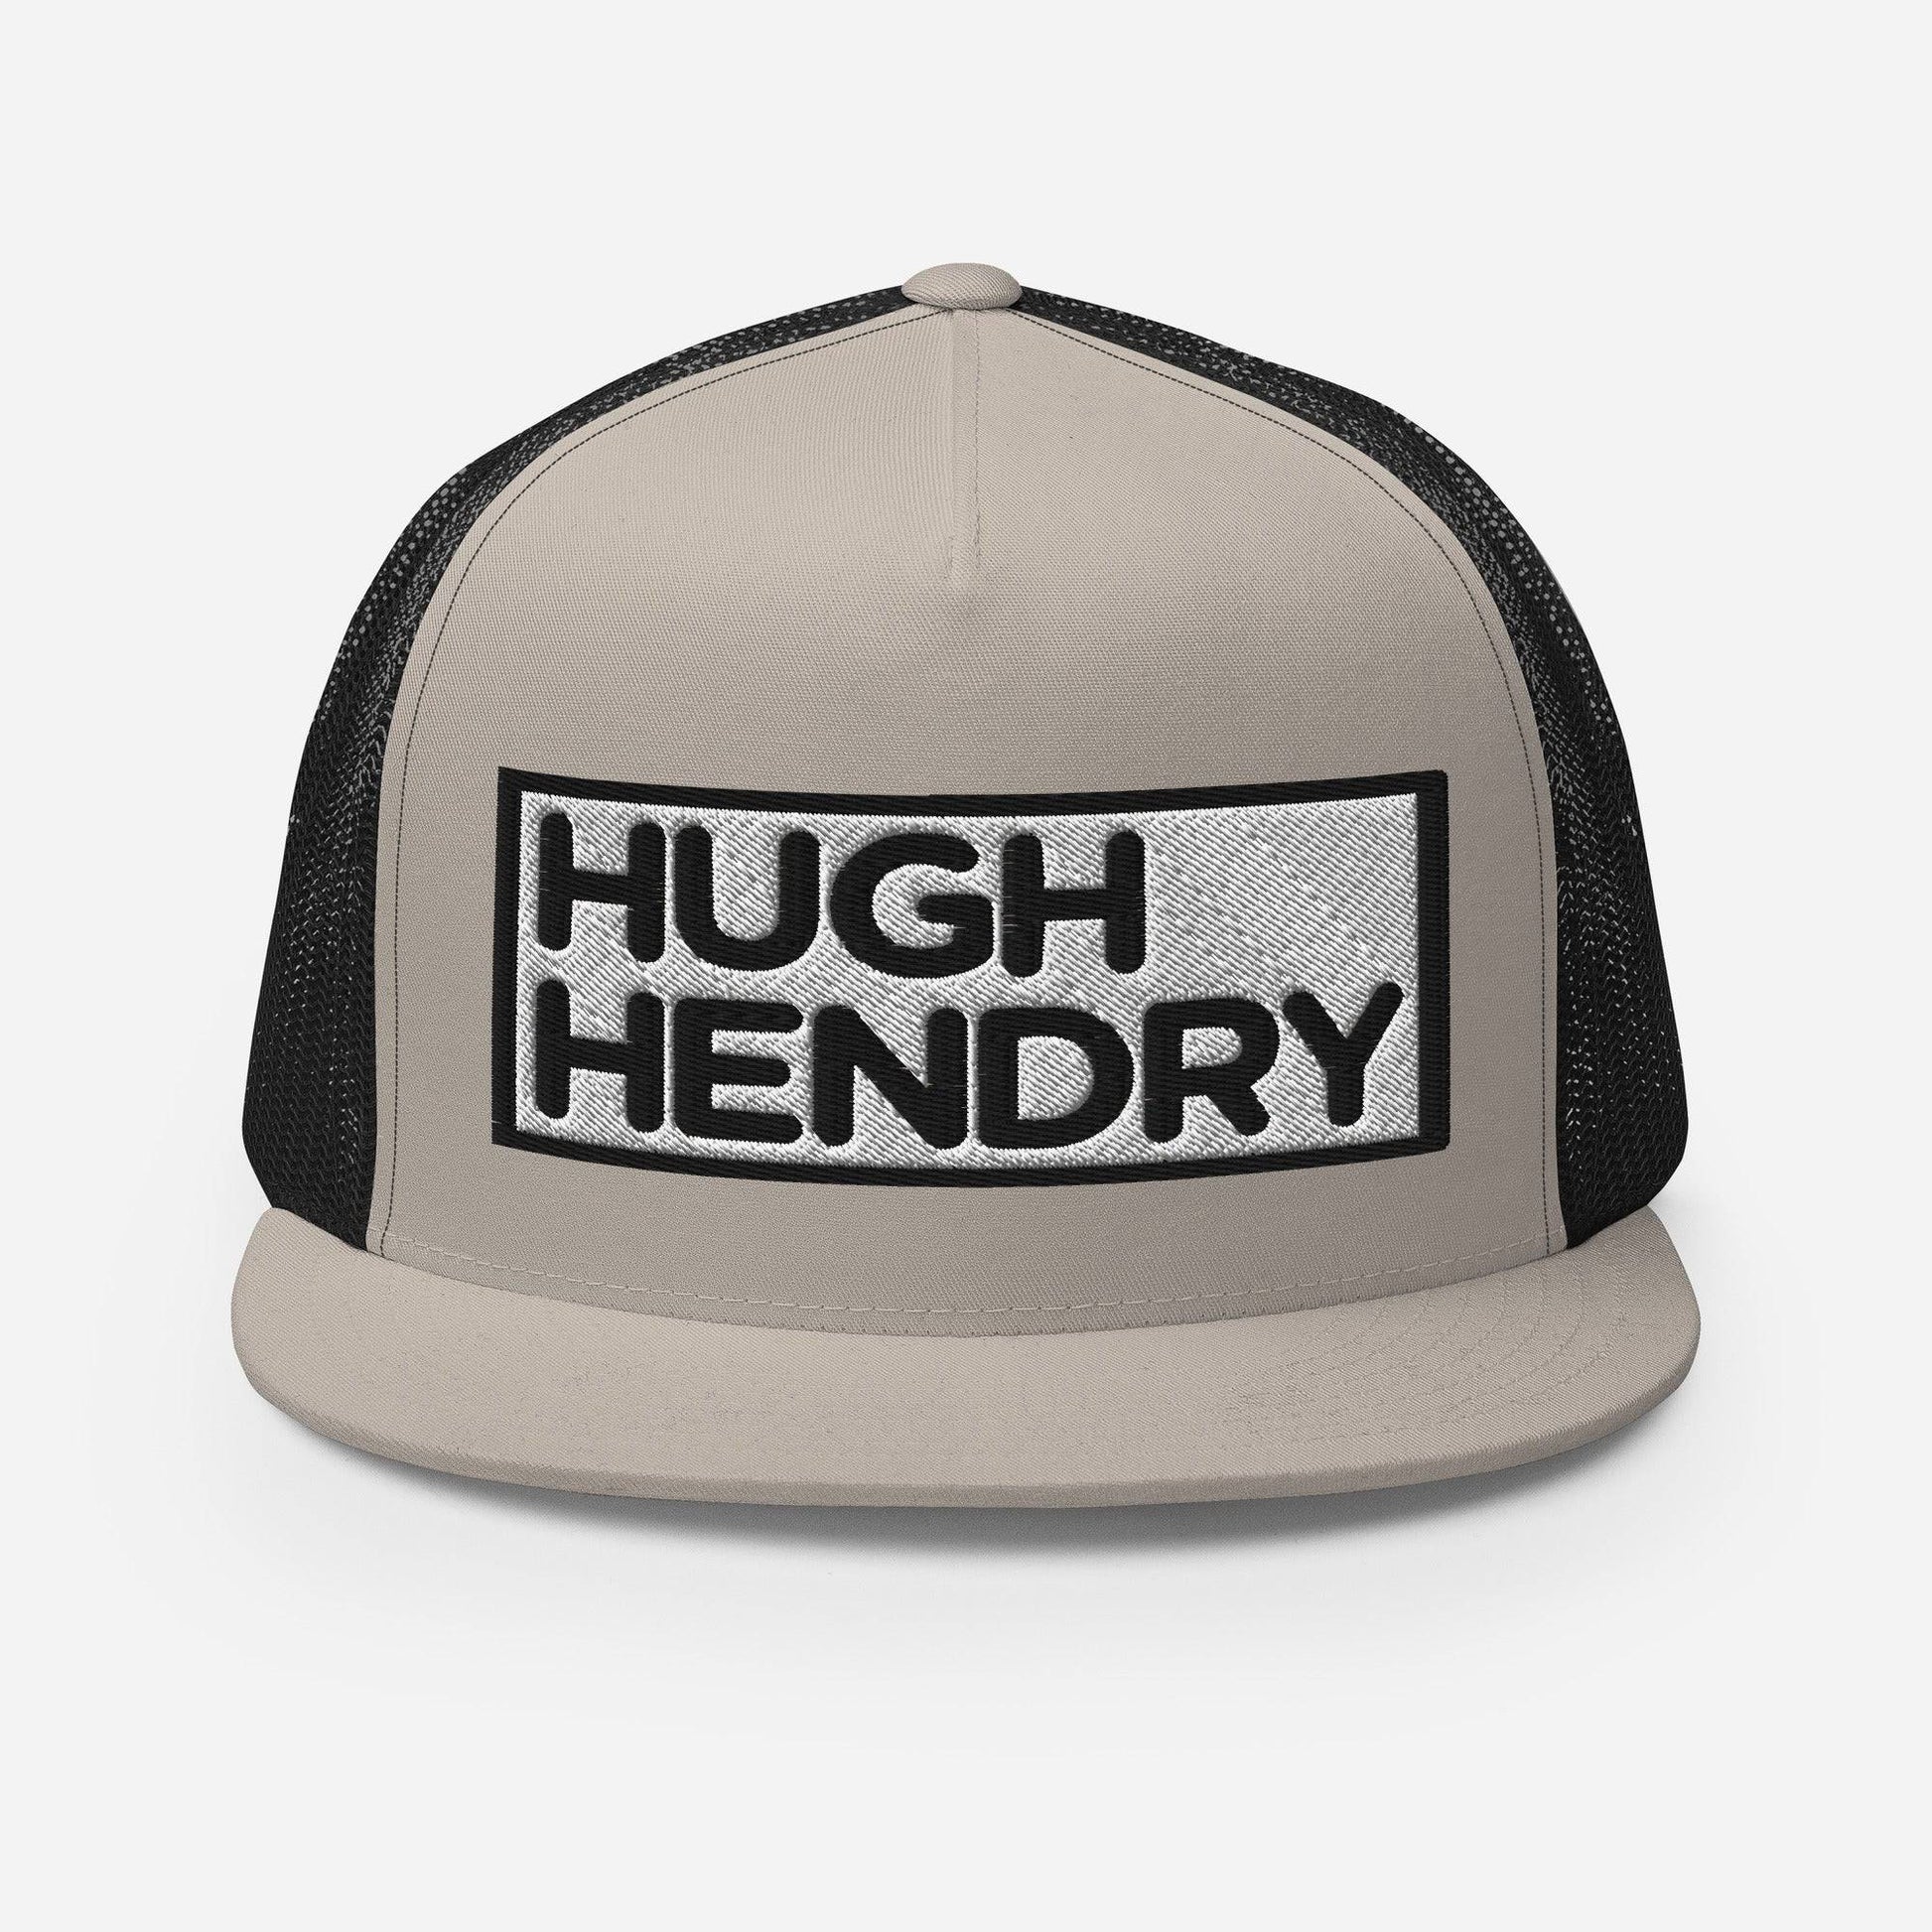 Hugh Hendry Logo-Embroidered and Mesh Trucker Cap - Pixel Gallery